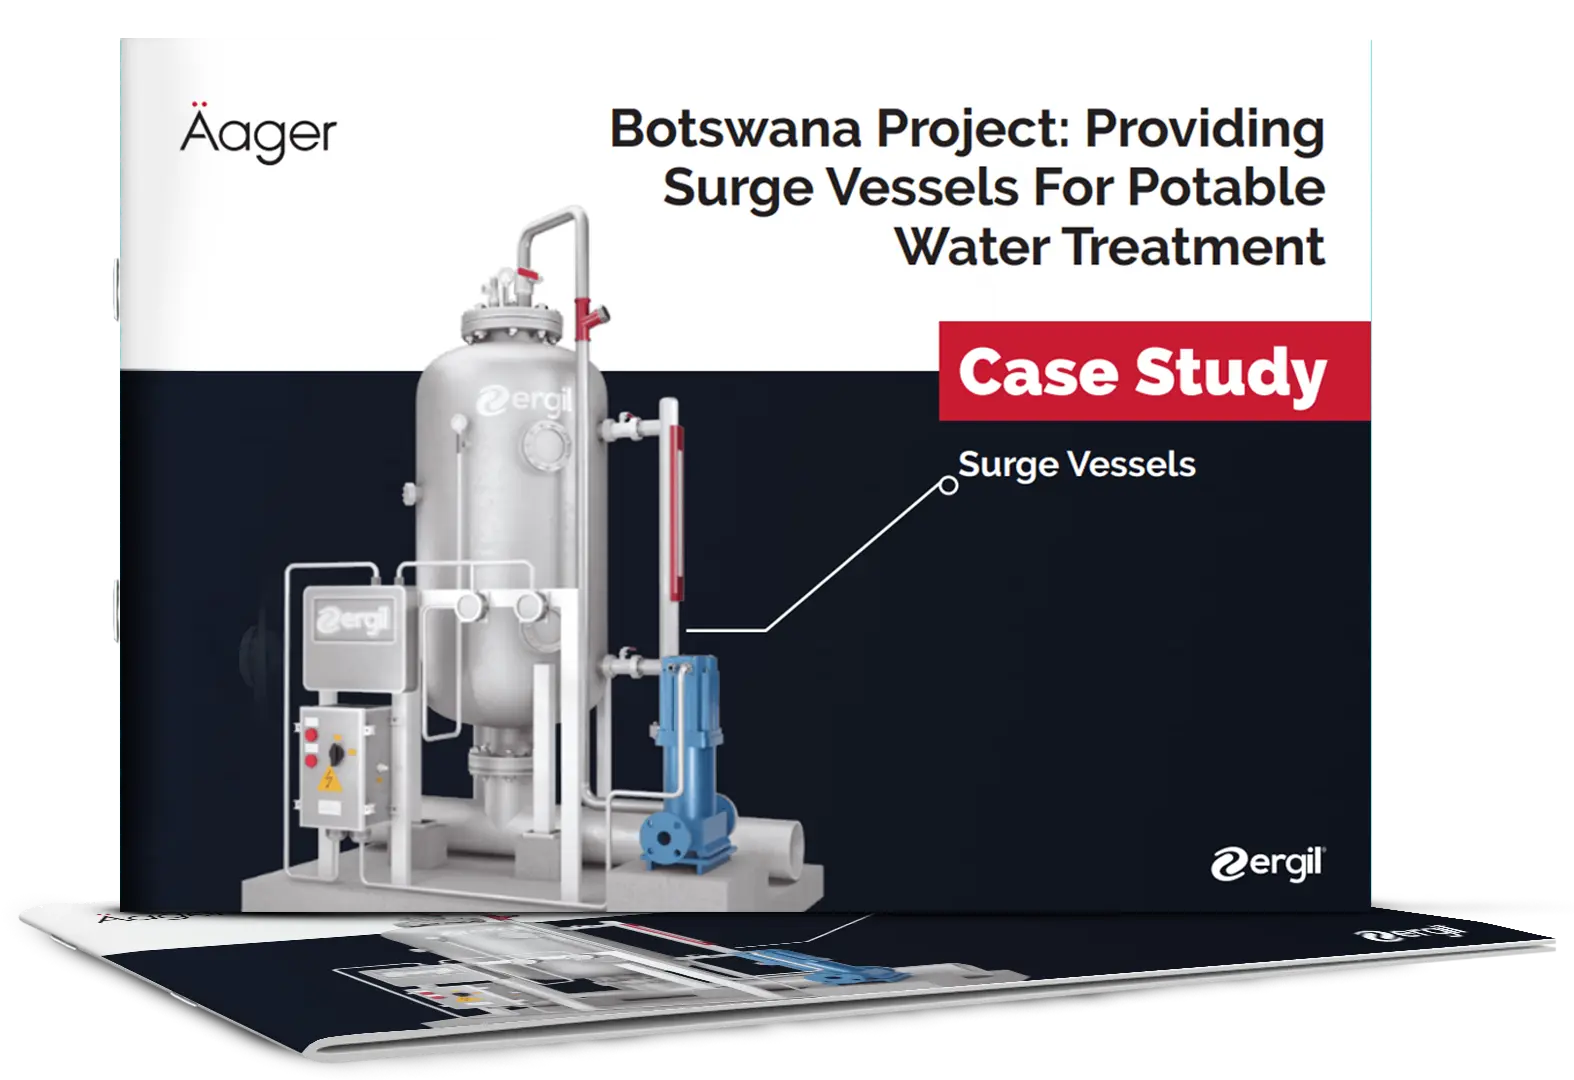 Botswana Project: Providing Surge Vessels for Potable Water Treatment 71